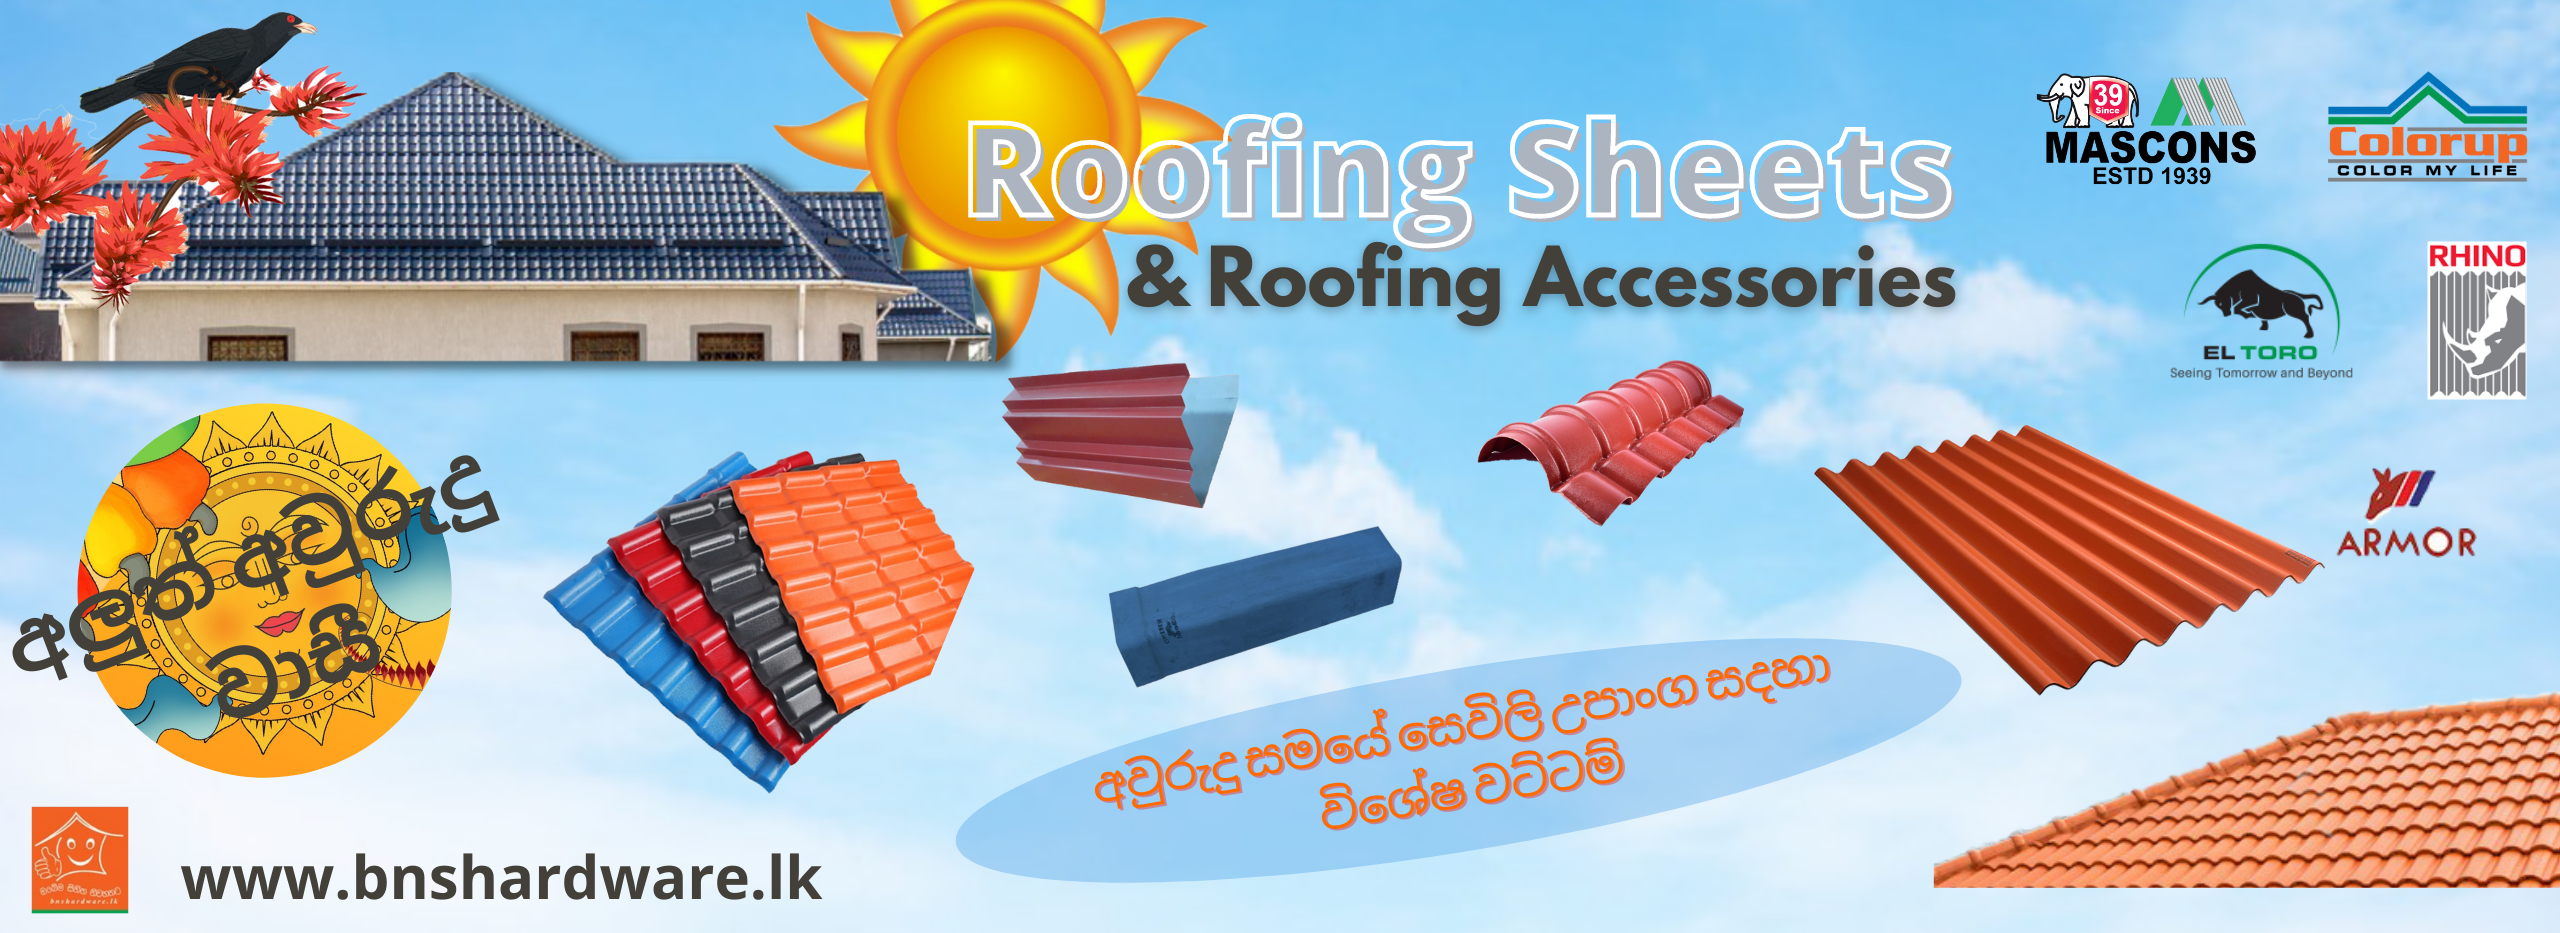 Roofing new year